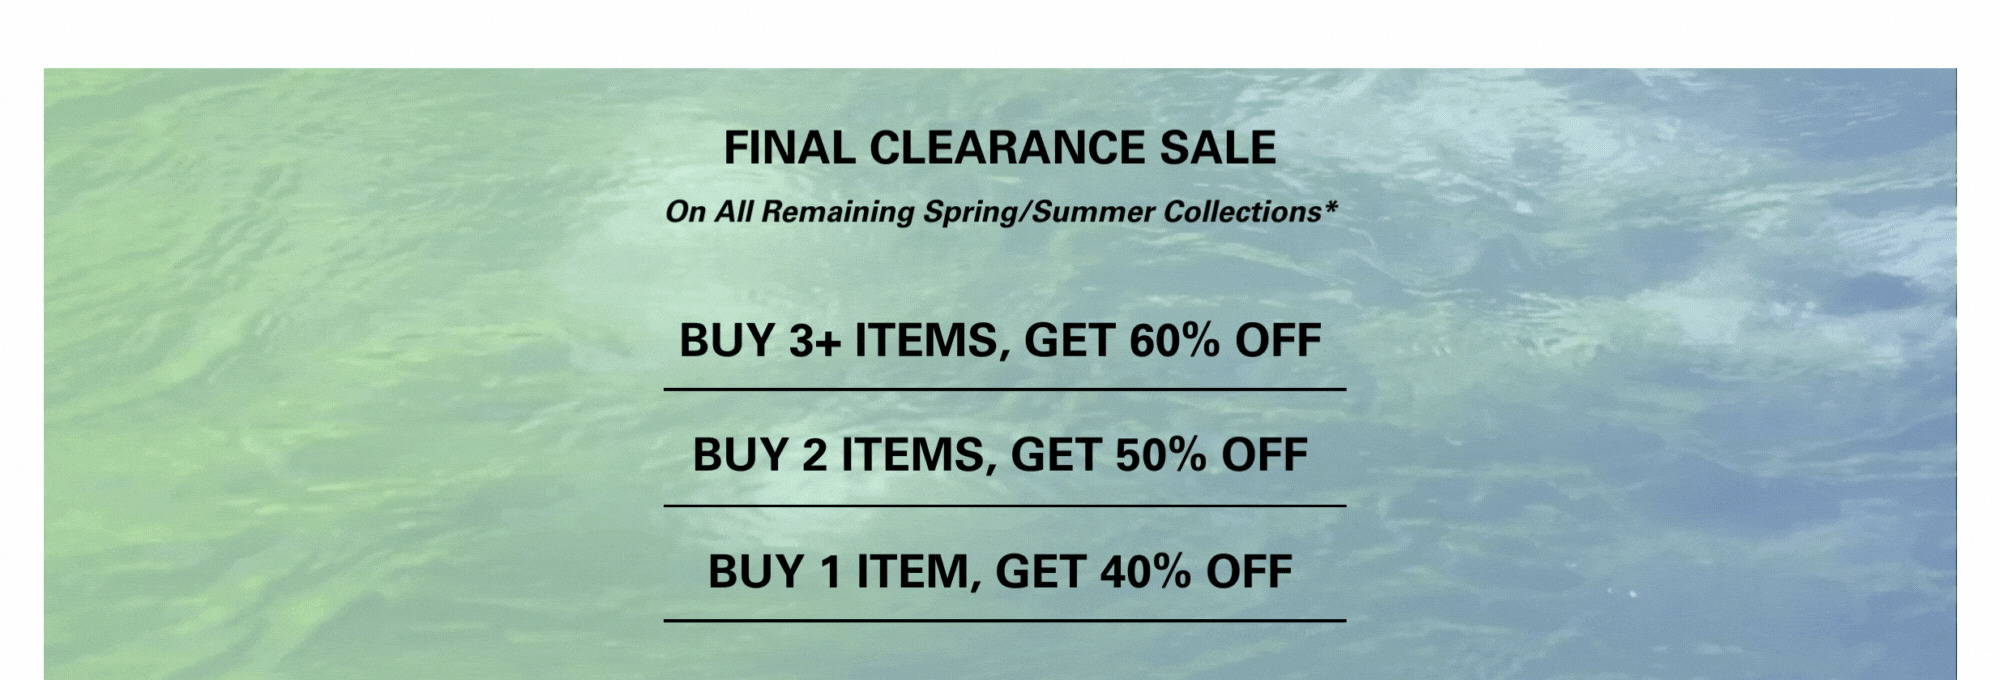 Final Clearance - up to 60% Off